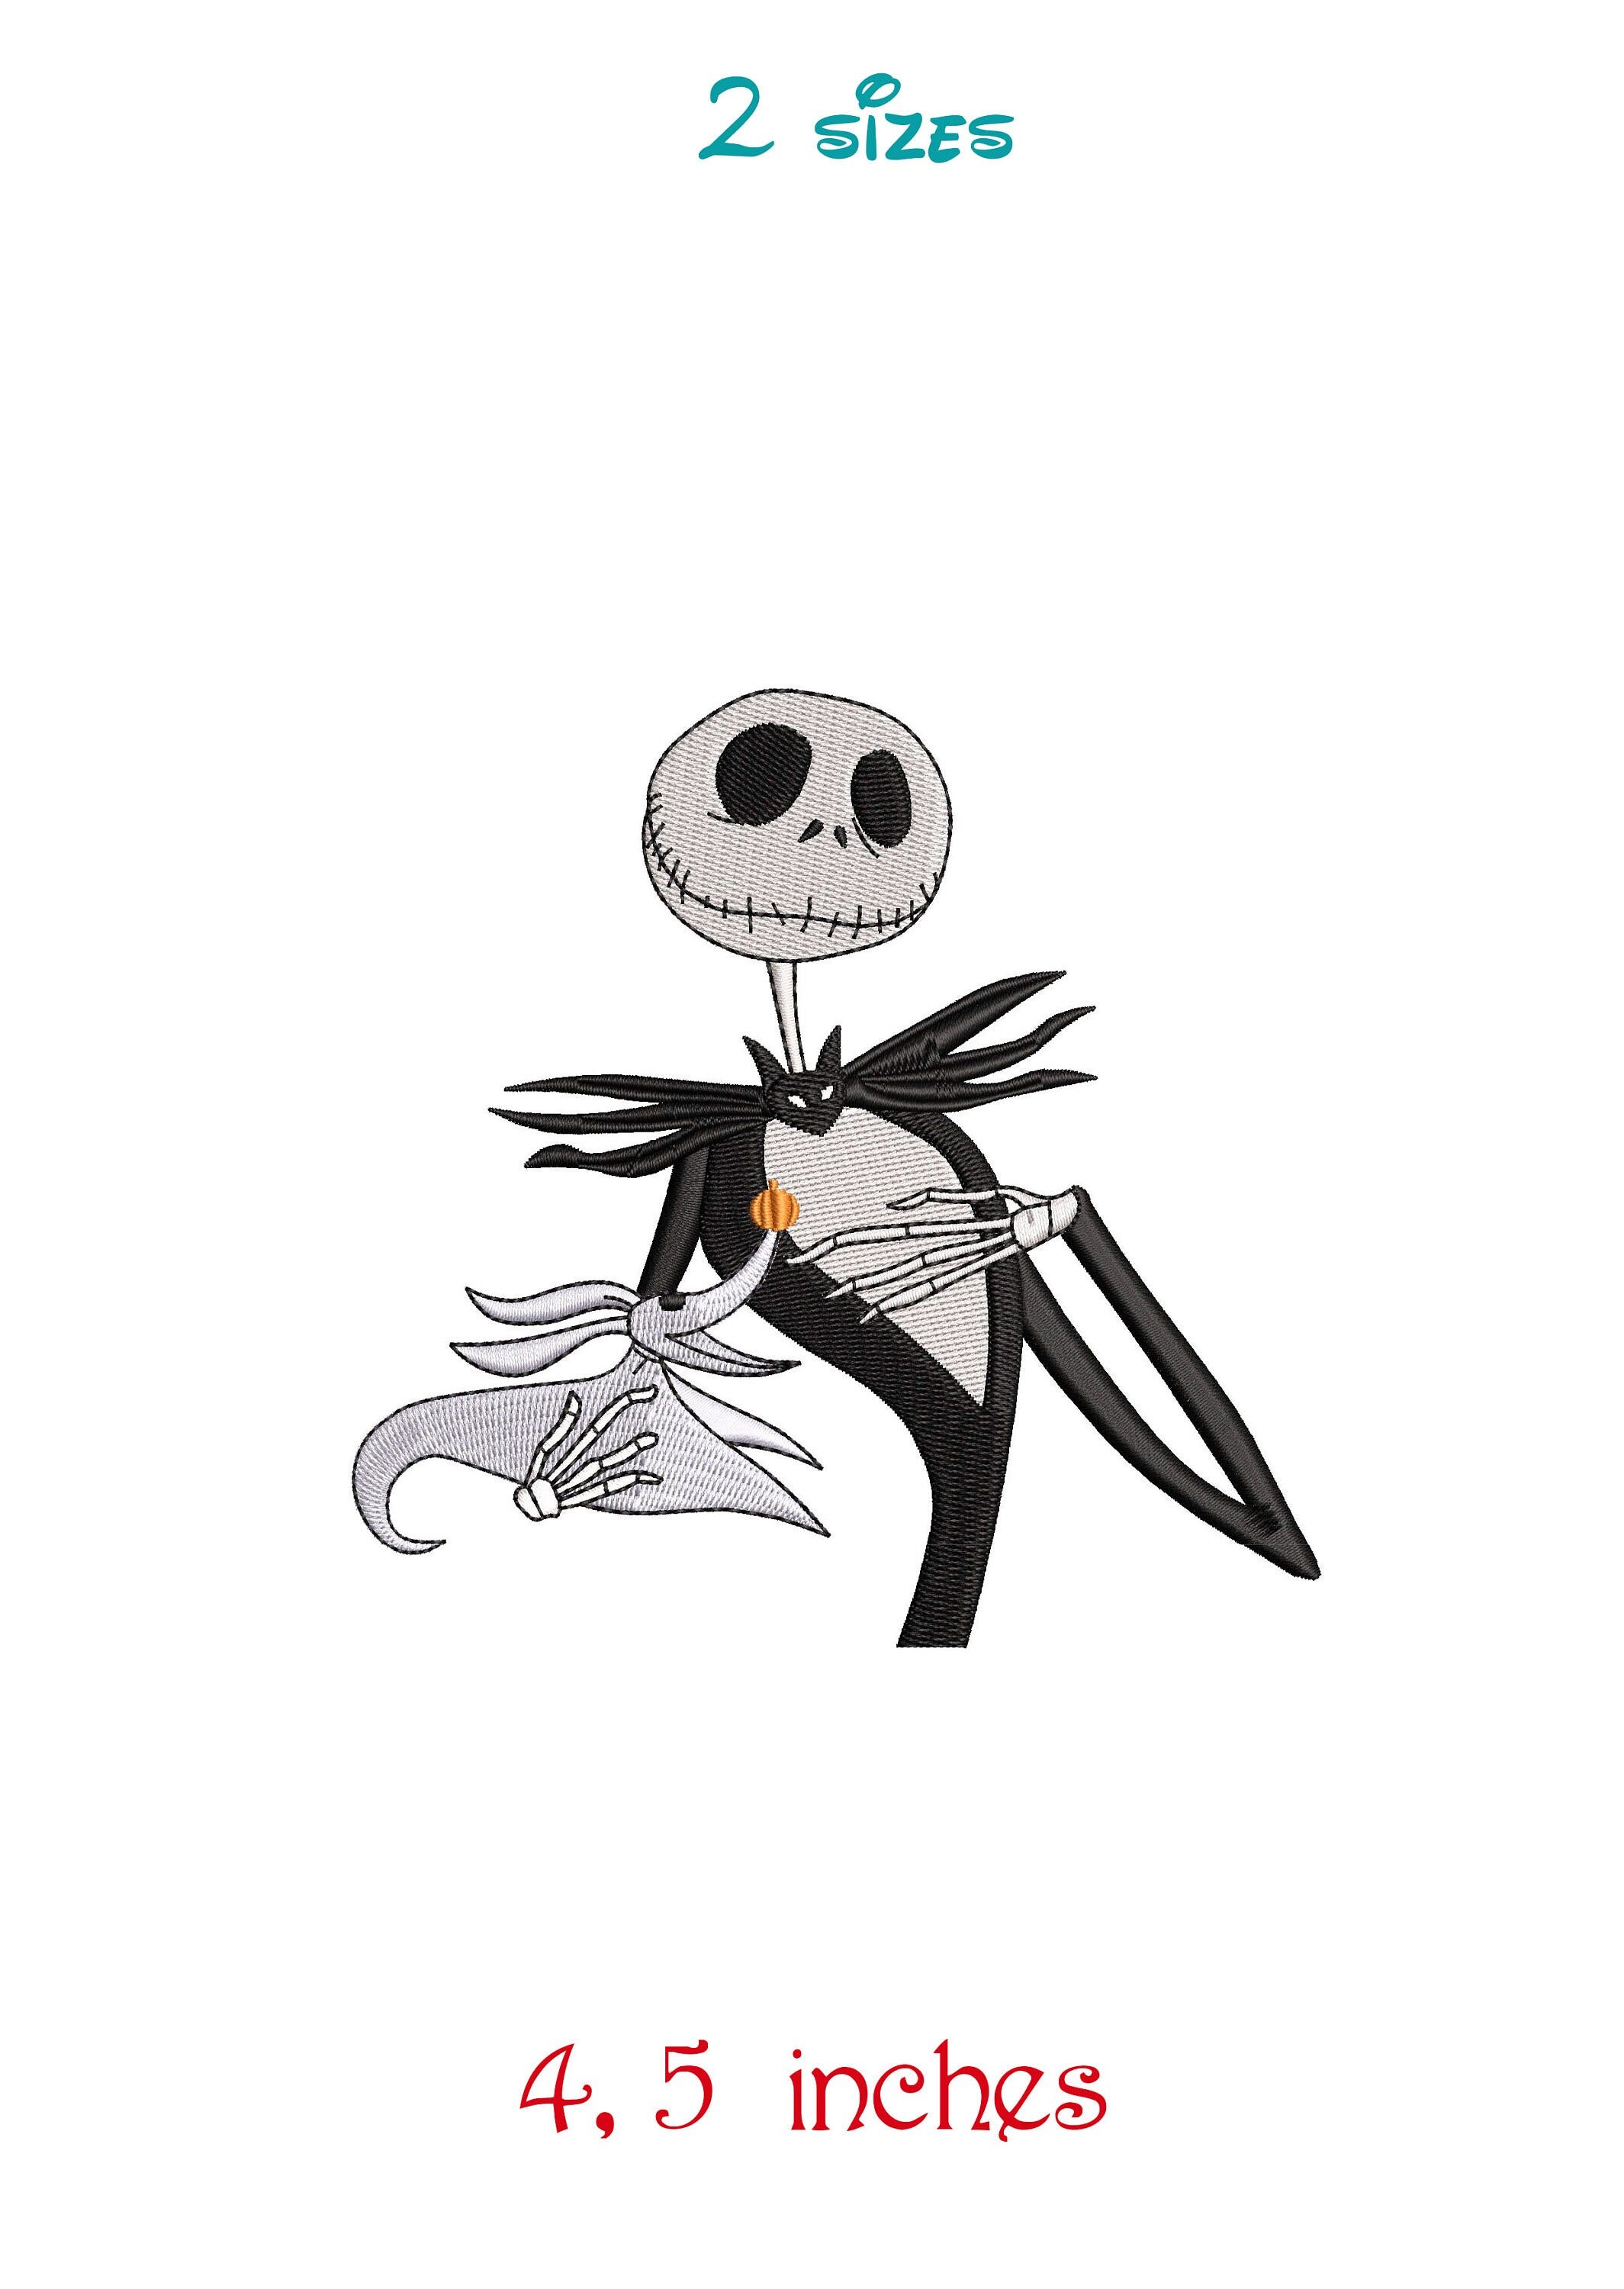 Inspired by Jack Skellington, The Nightmare Before Christmas: Embroidery Design Files. Install download. Different sizes